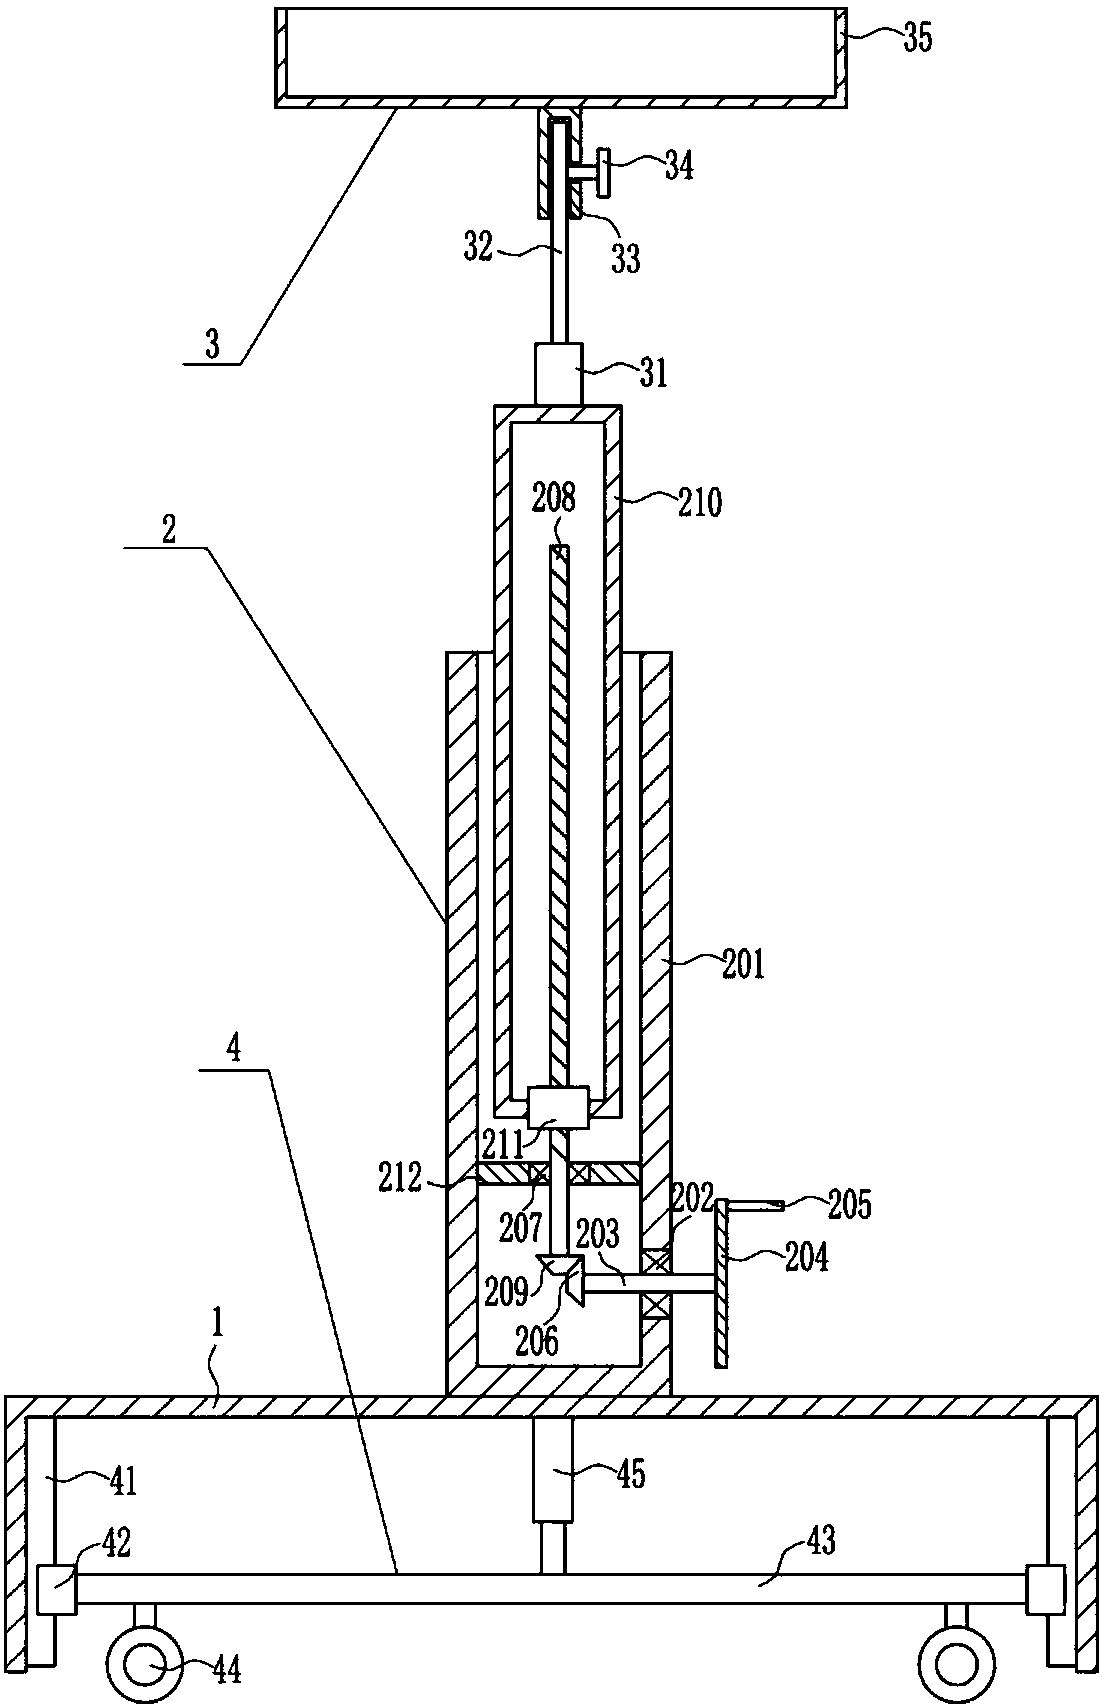 Flying dust monitoring device for construction monitoring